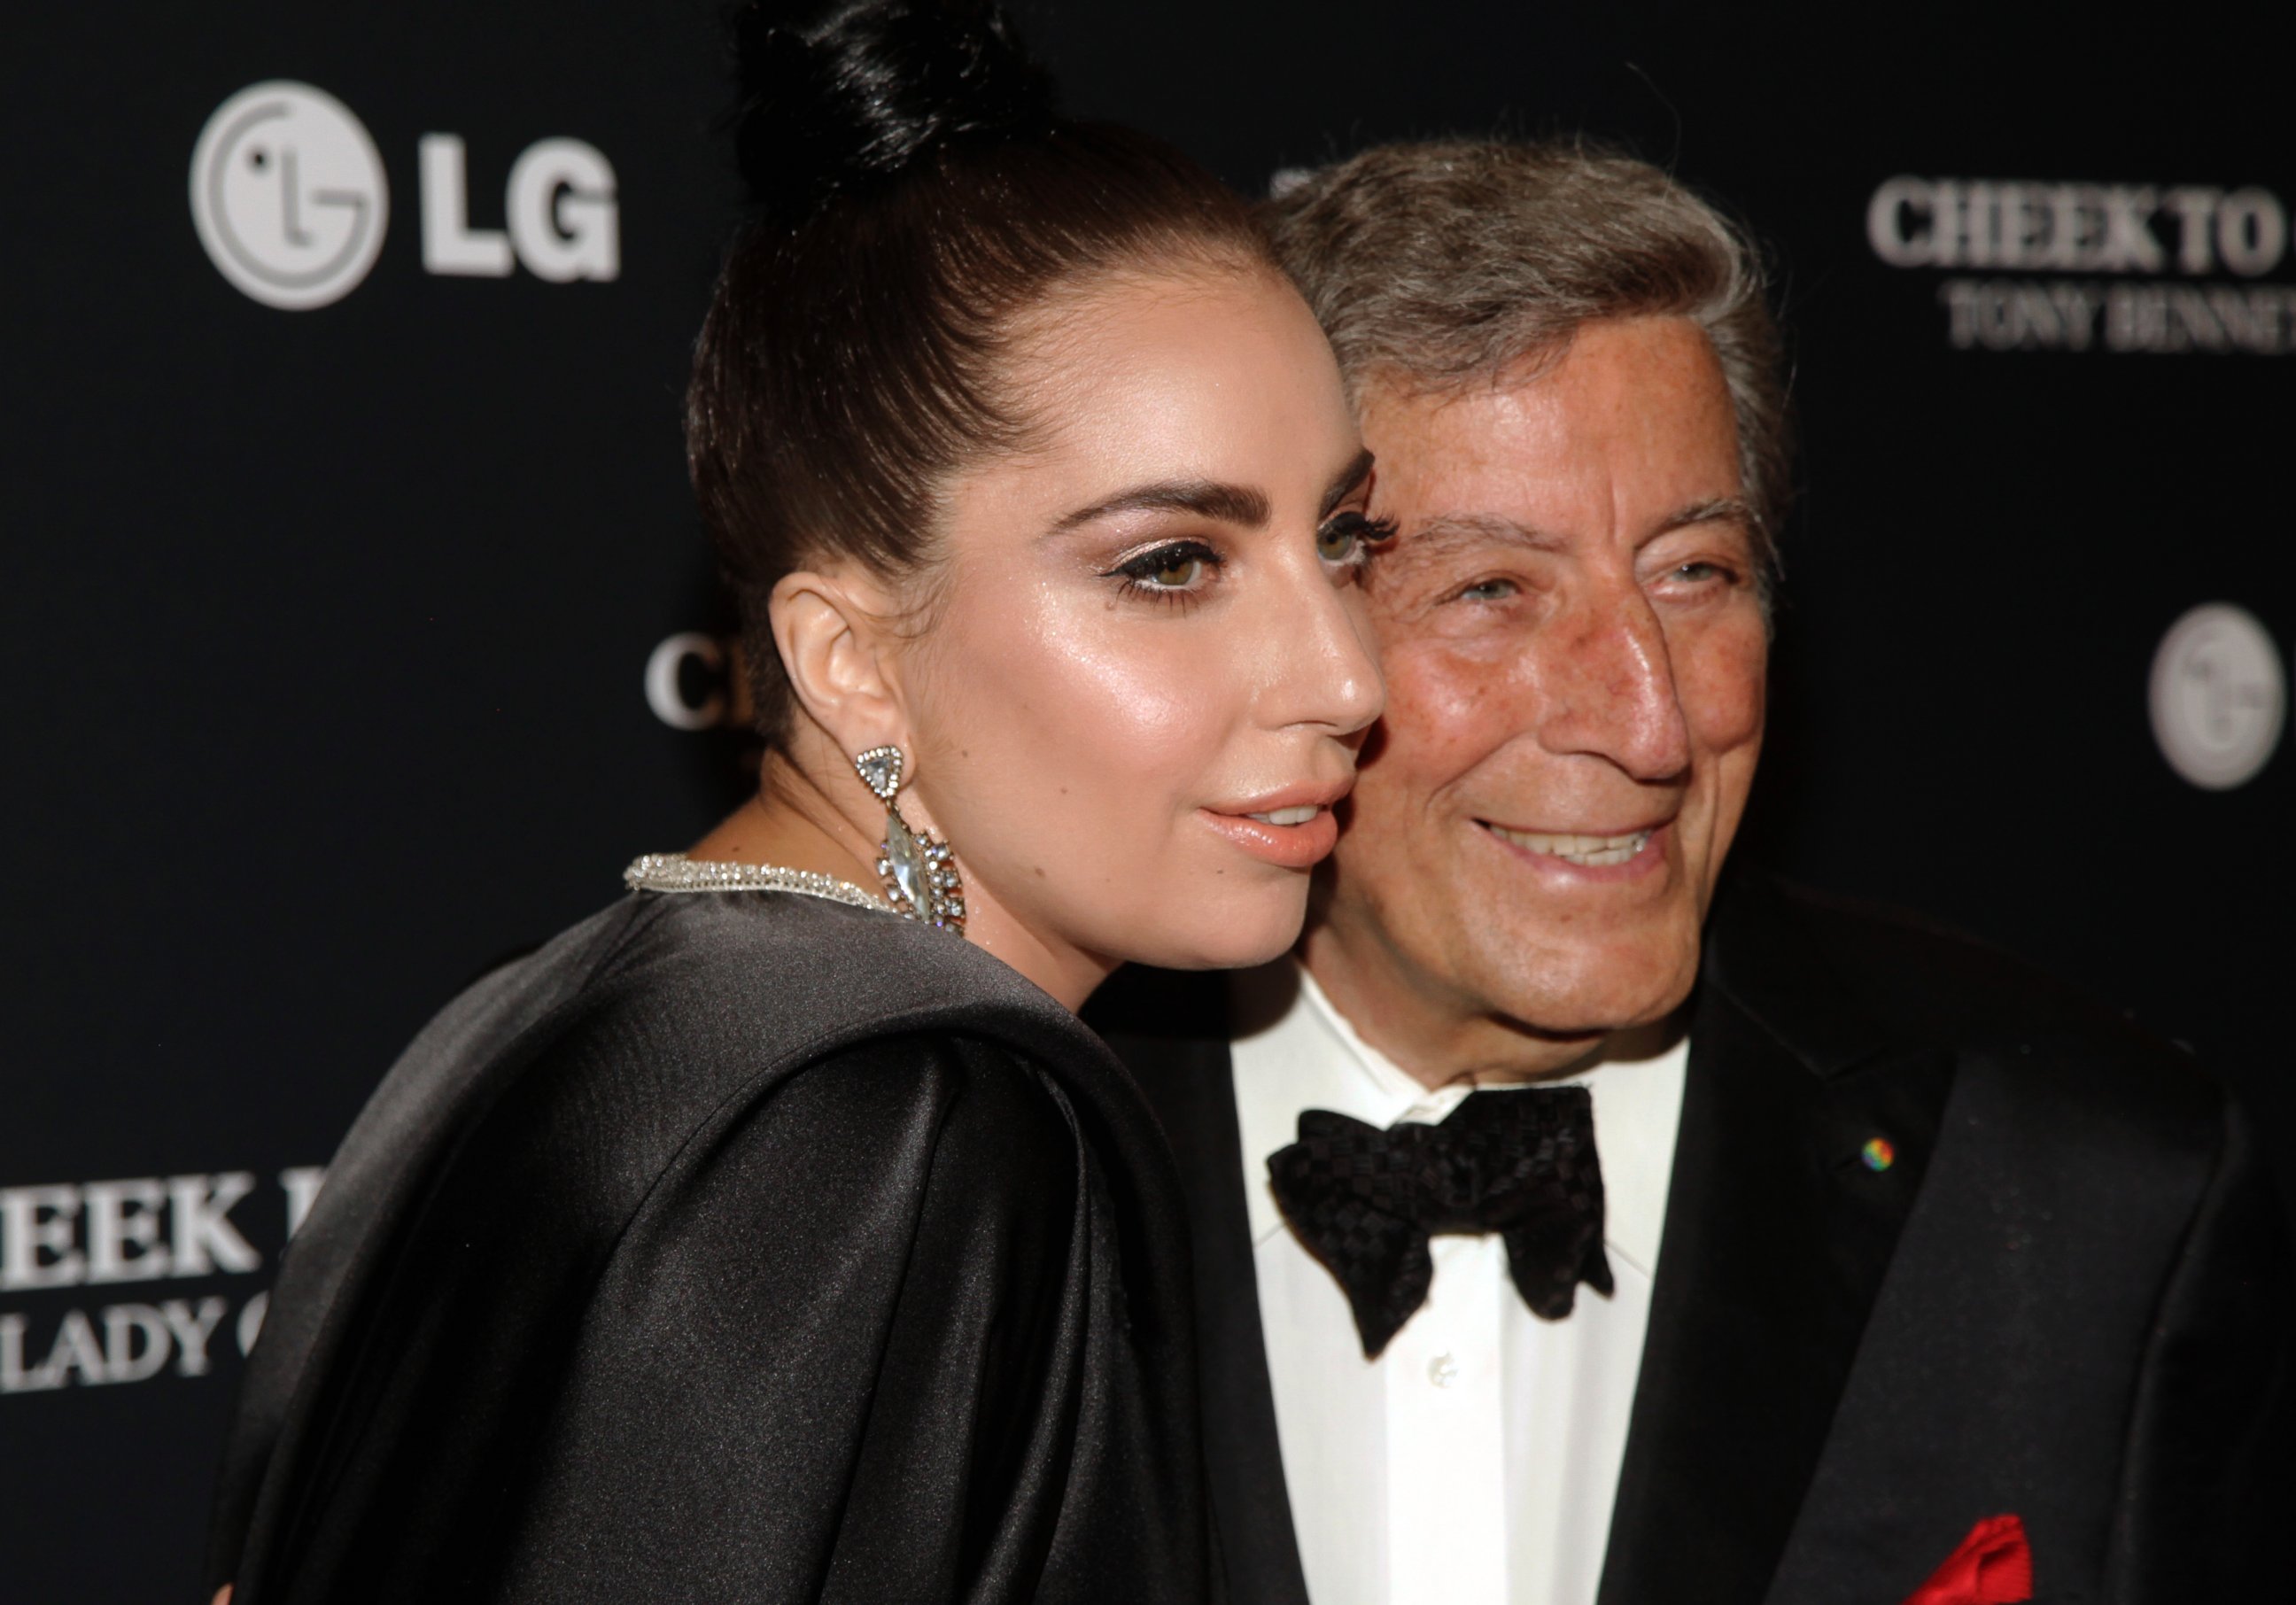 PHOTO: Tony Bennett, right, and Lady Gaga attend a concert taping, July 28, 2014, in New York.